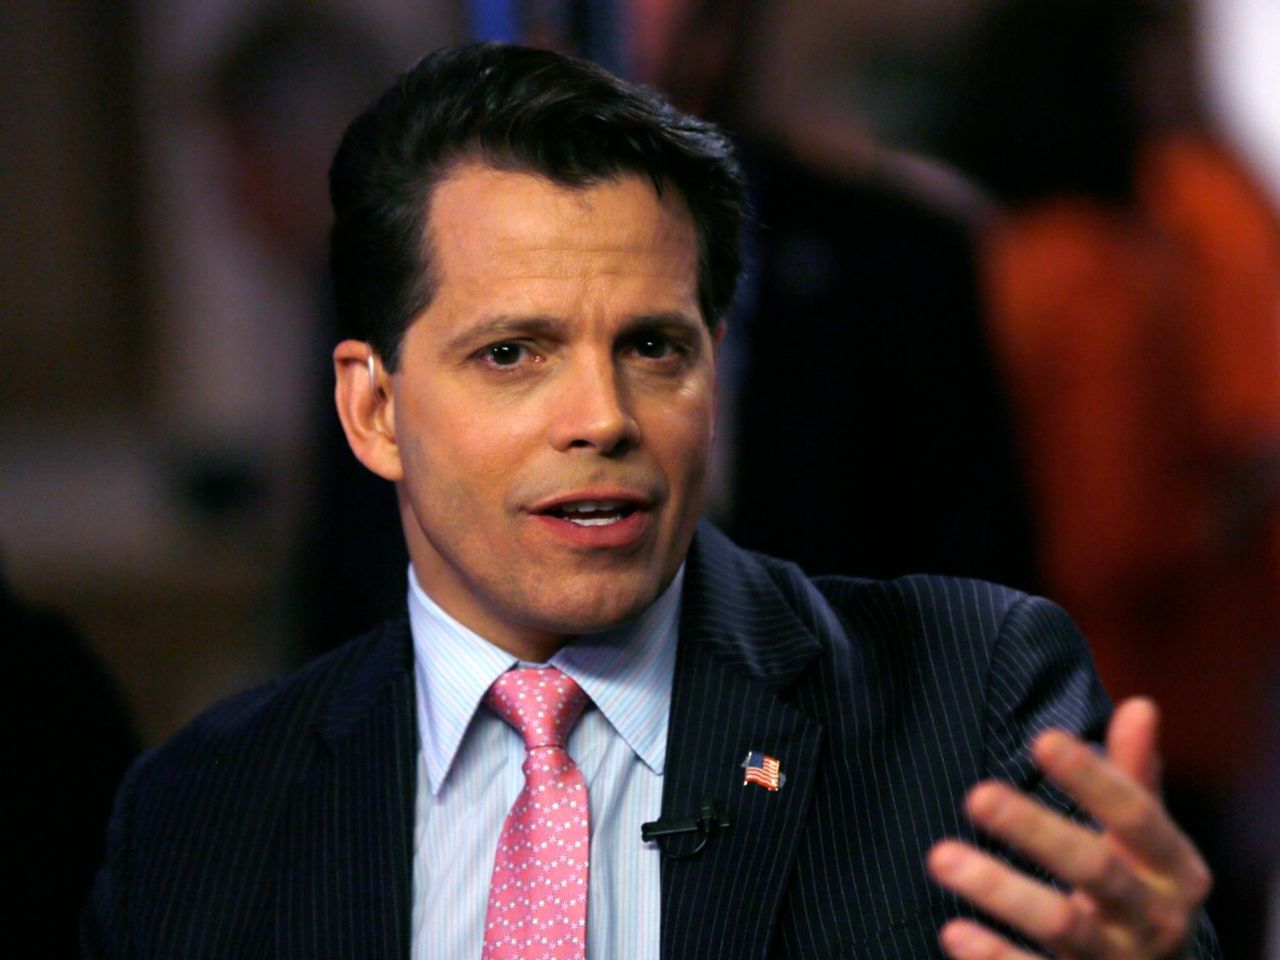 report-anthony-scaramucci-is-headed-to-the-white-house-as-an-assistant-to-trump-1